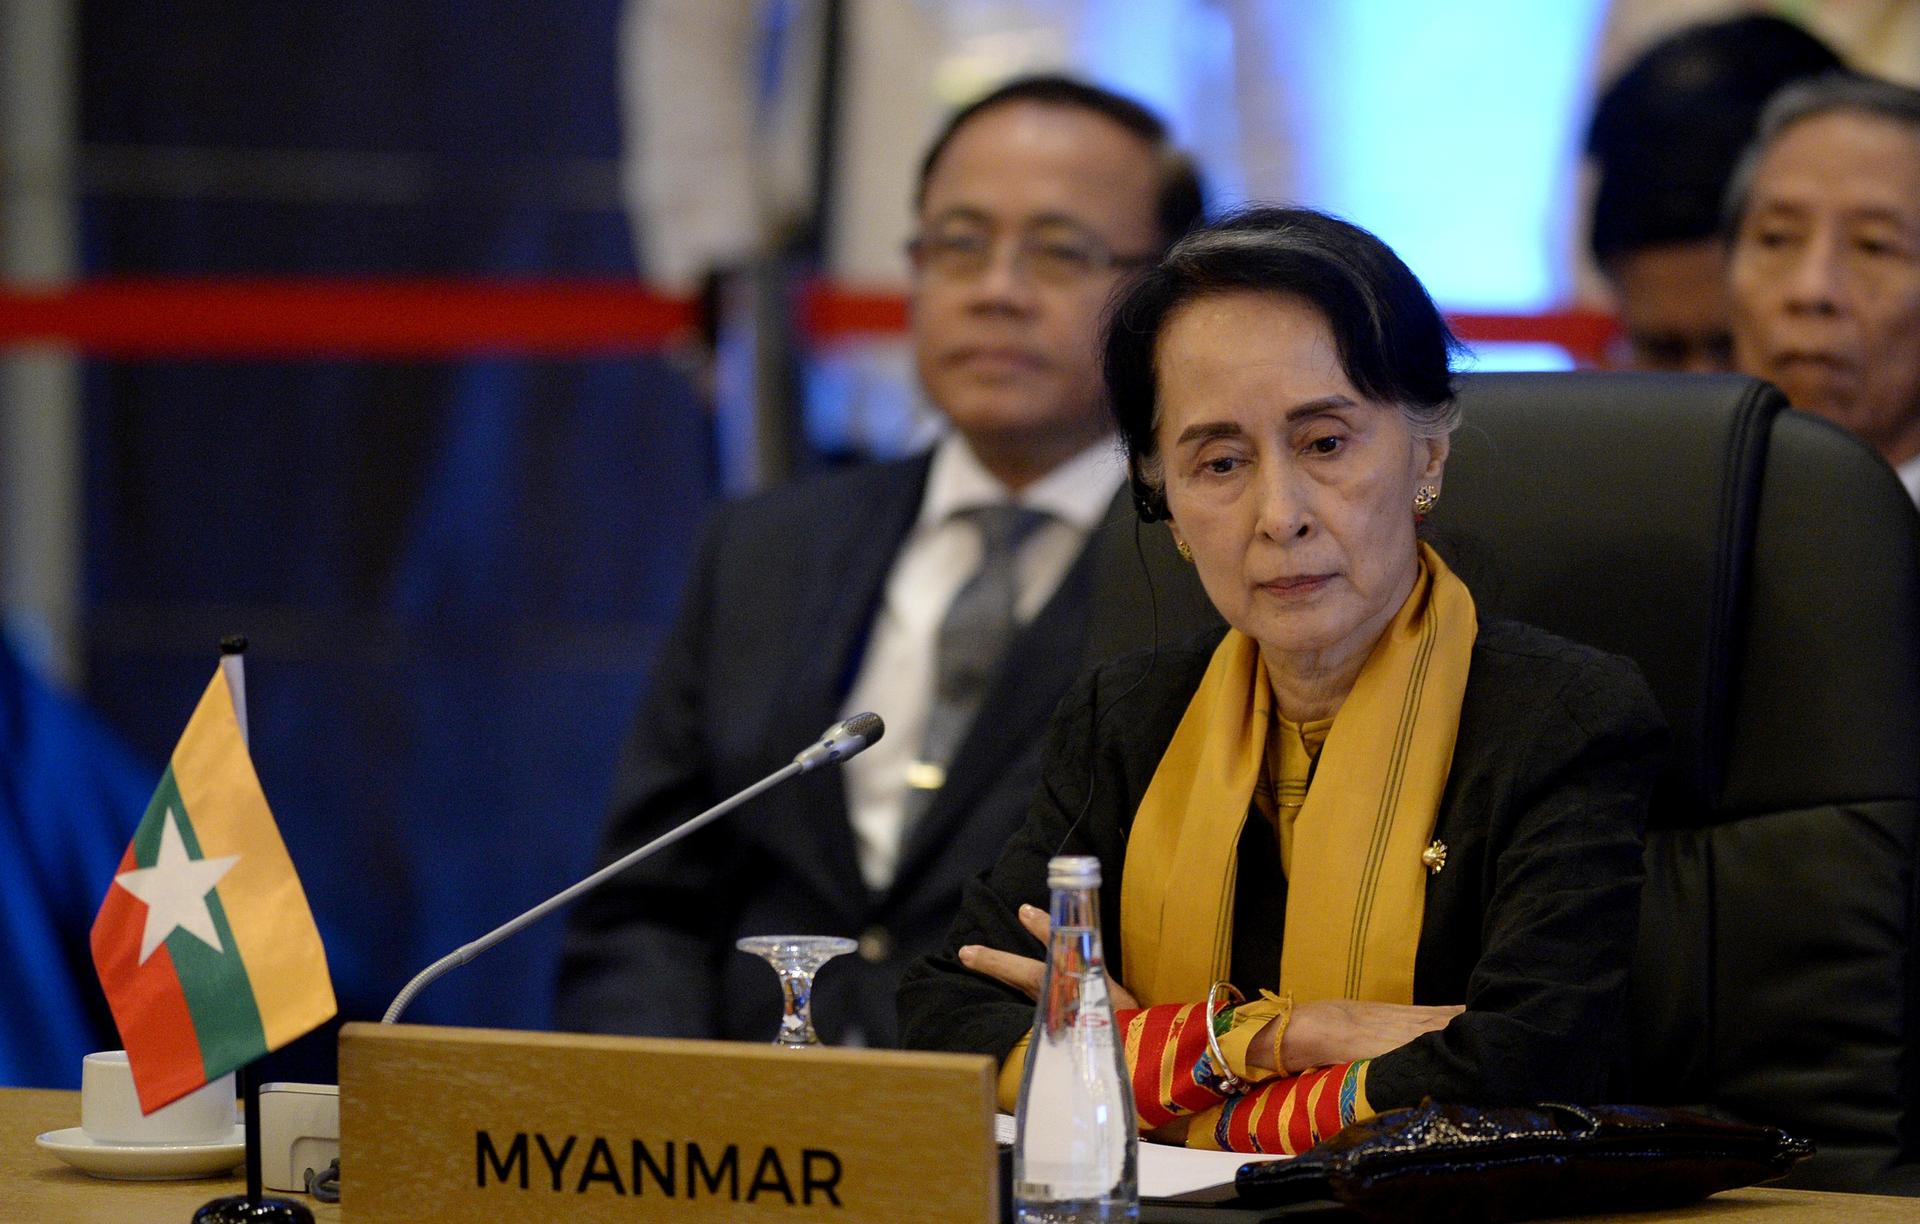 Aung San Suu Kyi looks down while sitting at a table behind a desktop placard with 